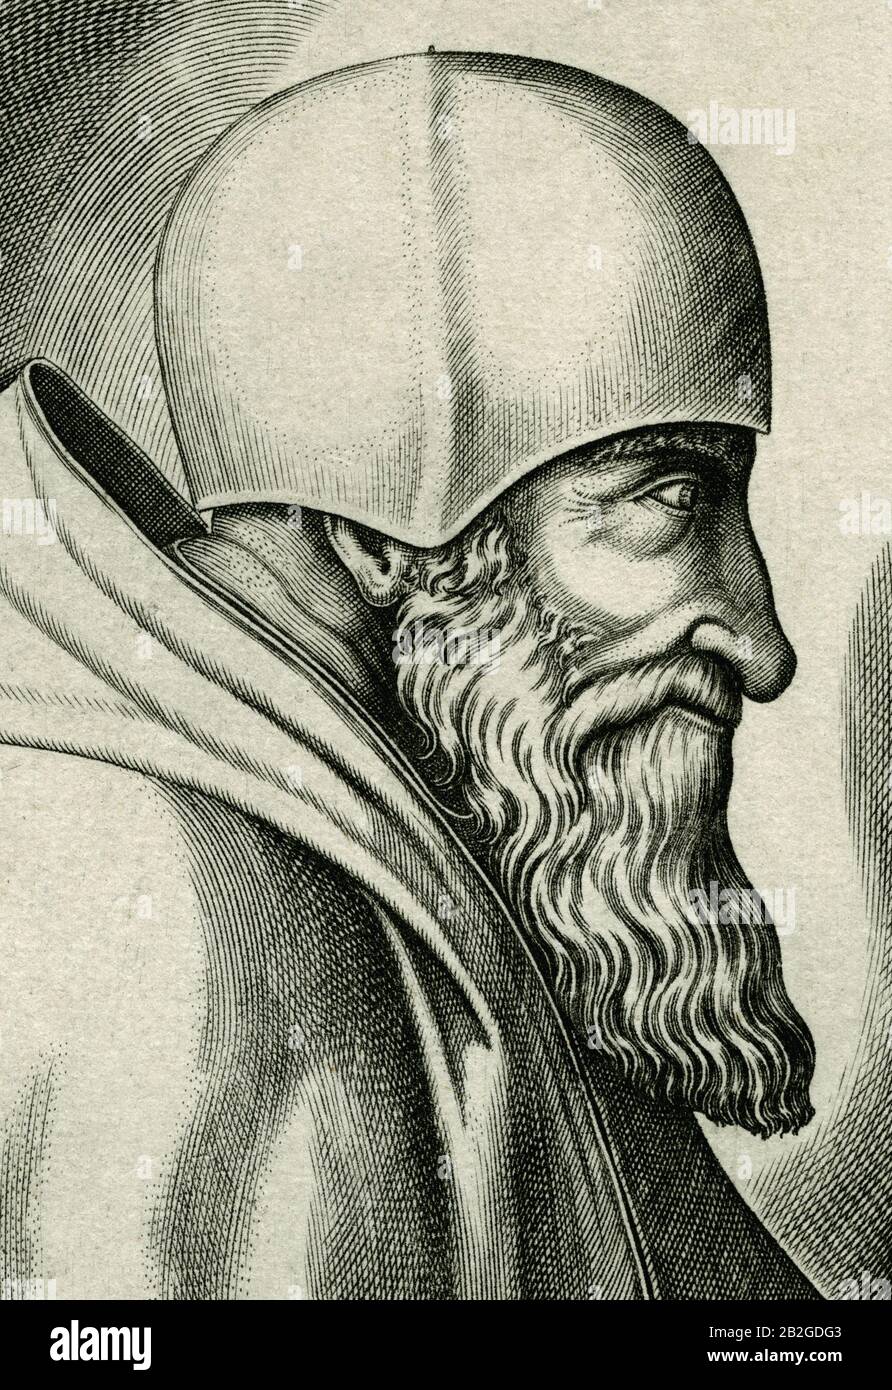 Pope Paul III (1468-1549) who led the Counter-Reformation and was a significant patron of the arts.  Detail of copperplate engraving created in the 1600s by engraver and printmaker Friedrich von Hulsen (c.1580-1665).  Pope Paul III established new religious orders, such as the Jesuits and the Barnabites, and convened the Council of Trent in 1545. He supported the Renaissance movement and Michelangelo's depiction of the Last Judgement was completed in the Sistine Chapel of the Vatican during his reign; he also appointed the ailing Michelangelo to supervise rebuilding of St Peter's Basilica. Stock Photo